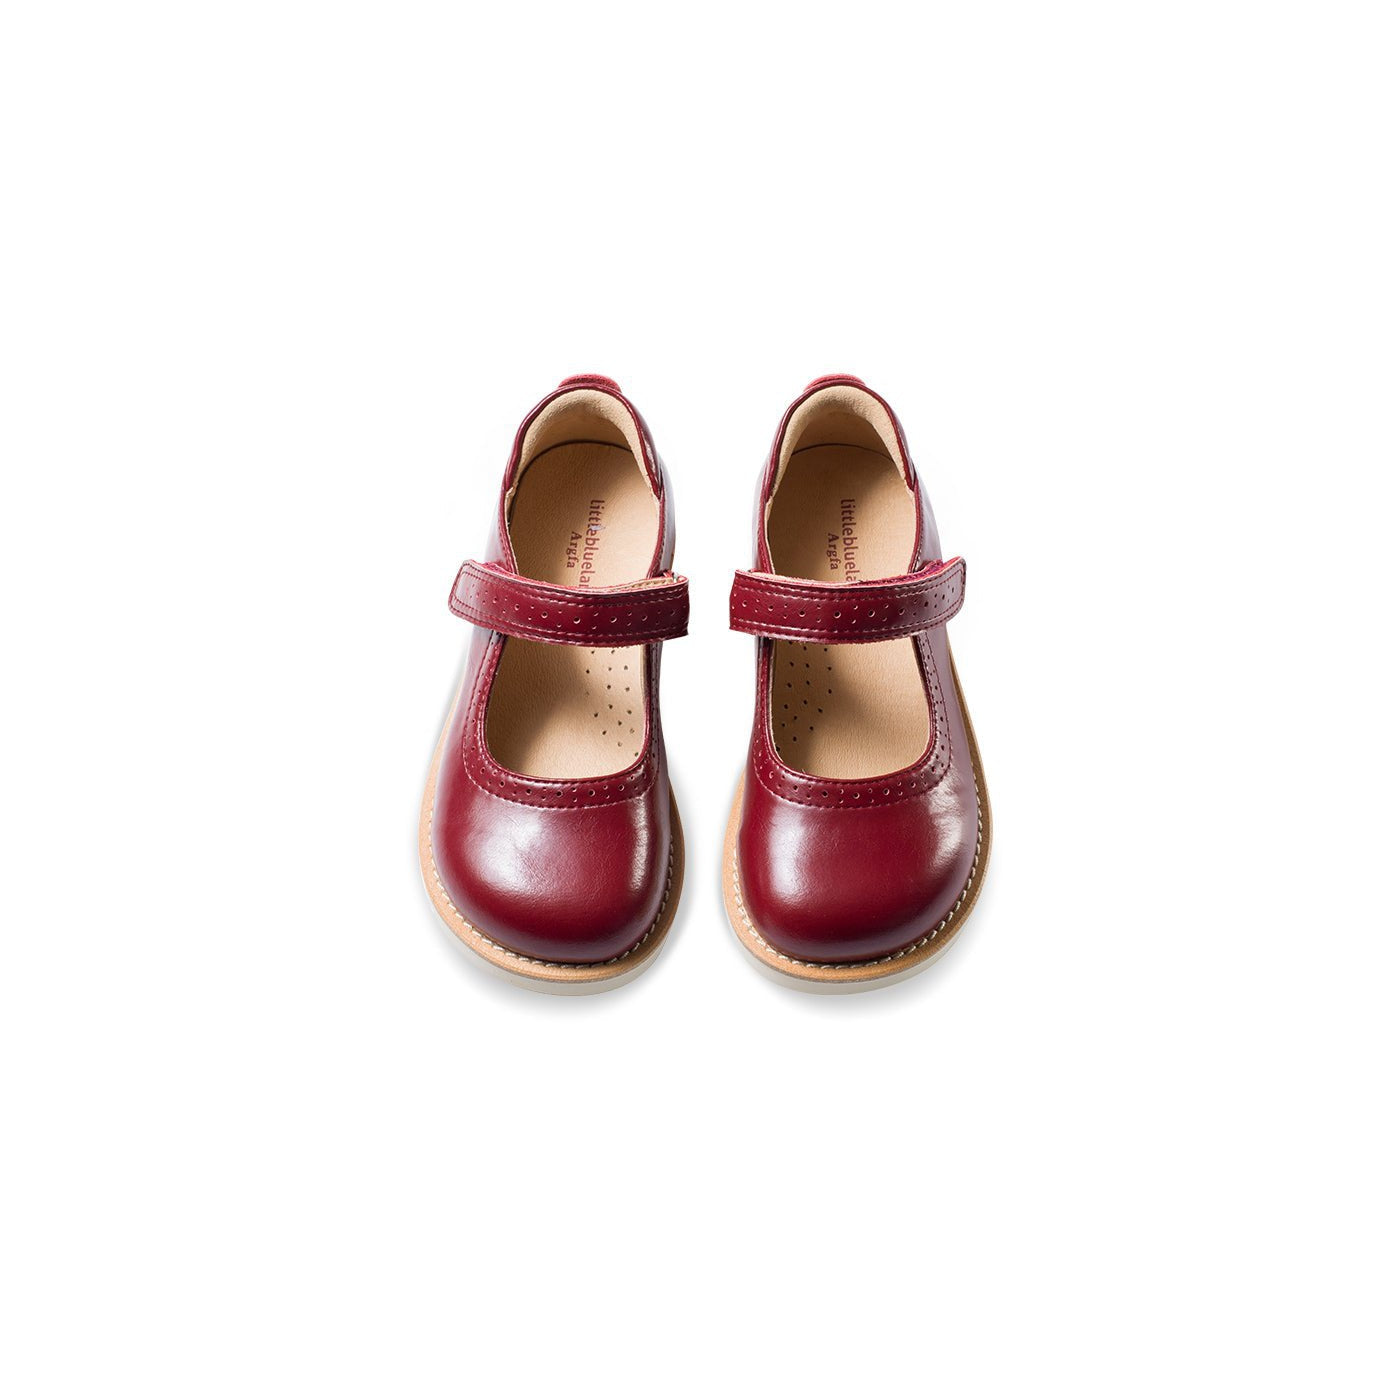 Easy Day Girl Red Soft Sole Mary Jane Shoes - 0cm